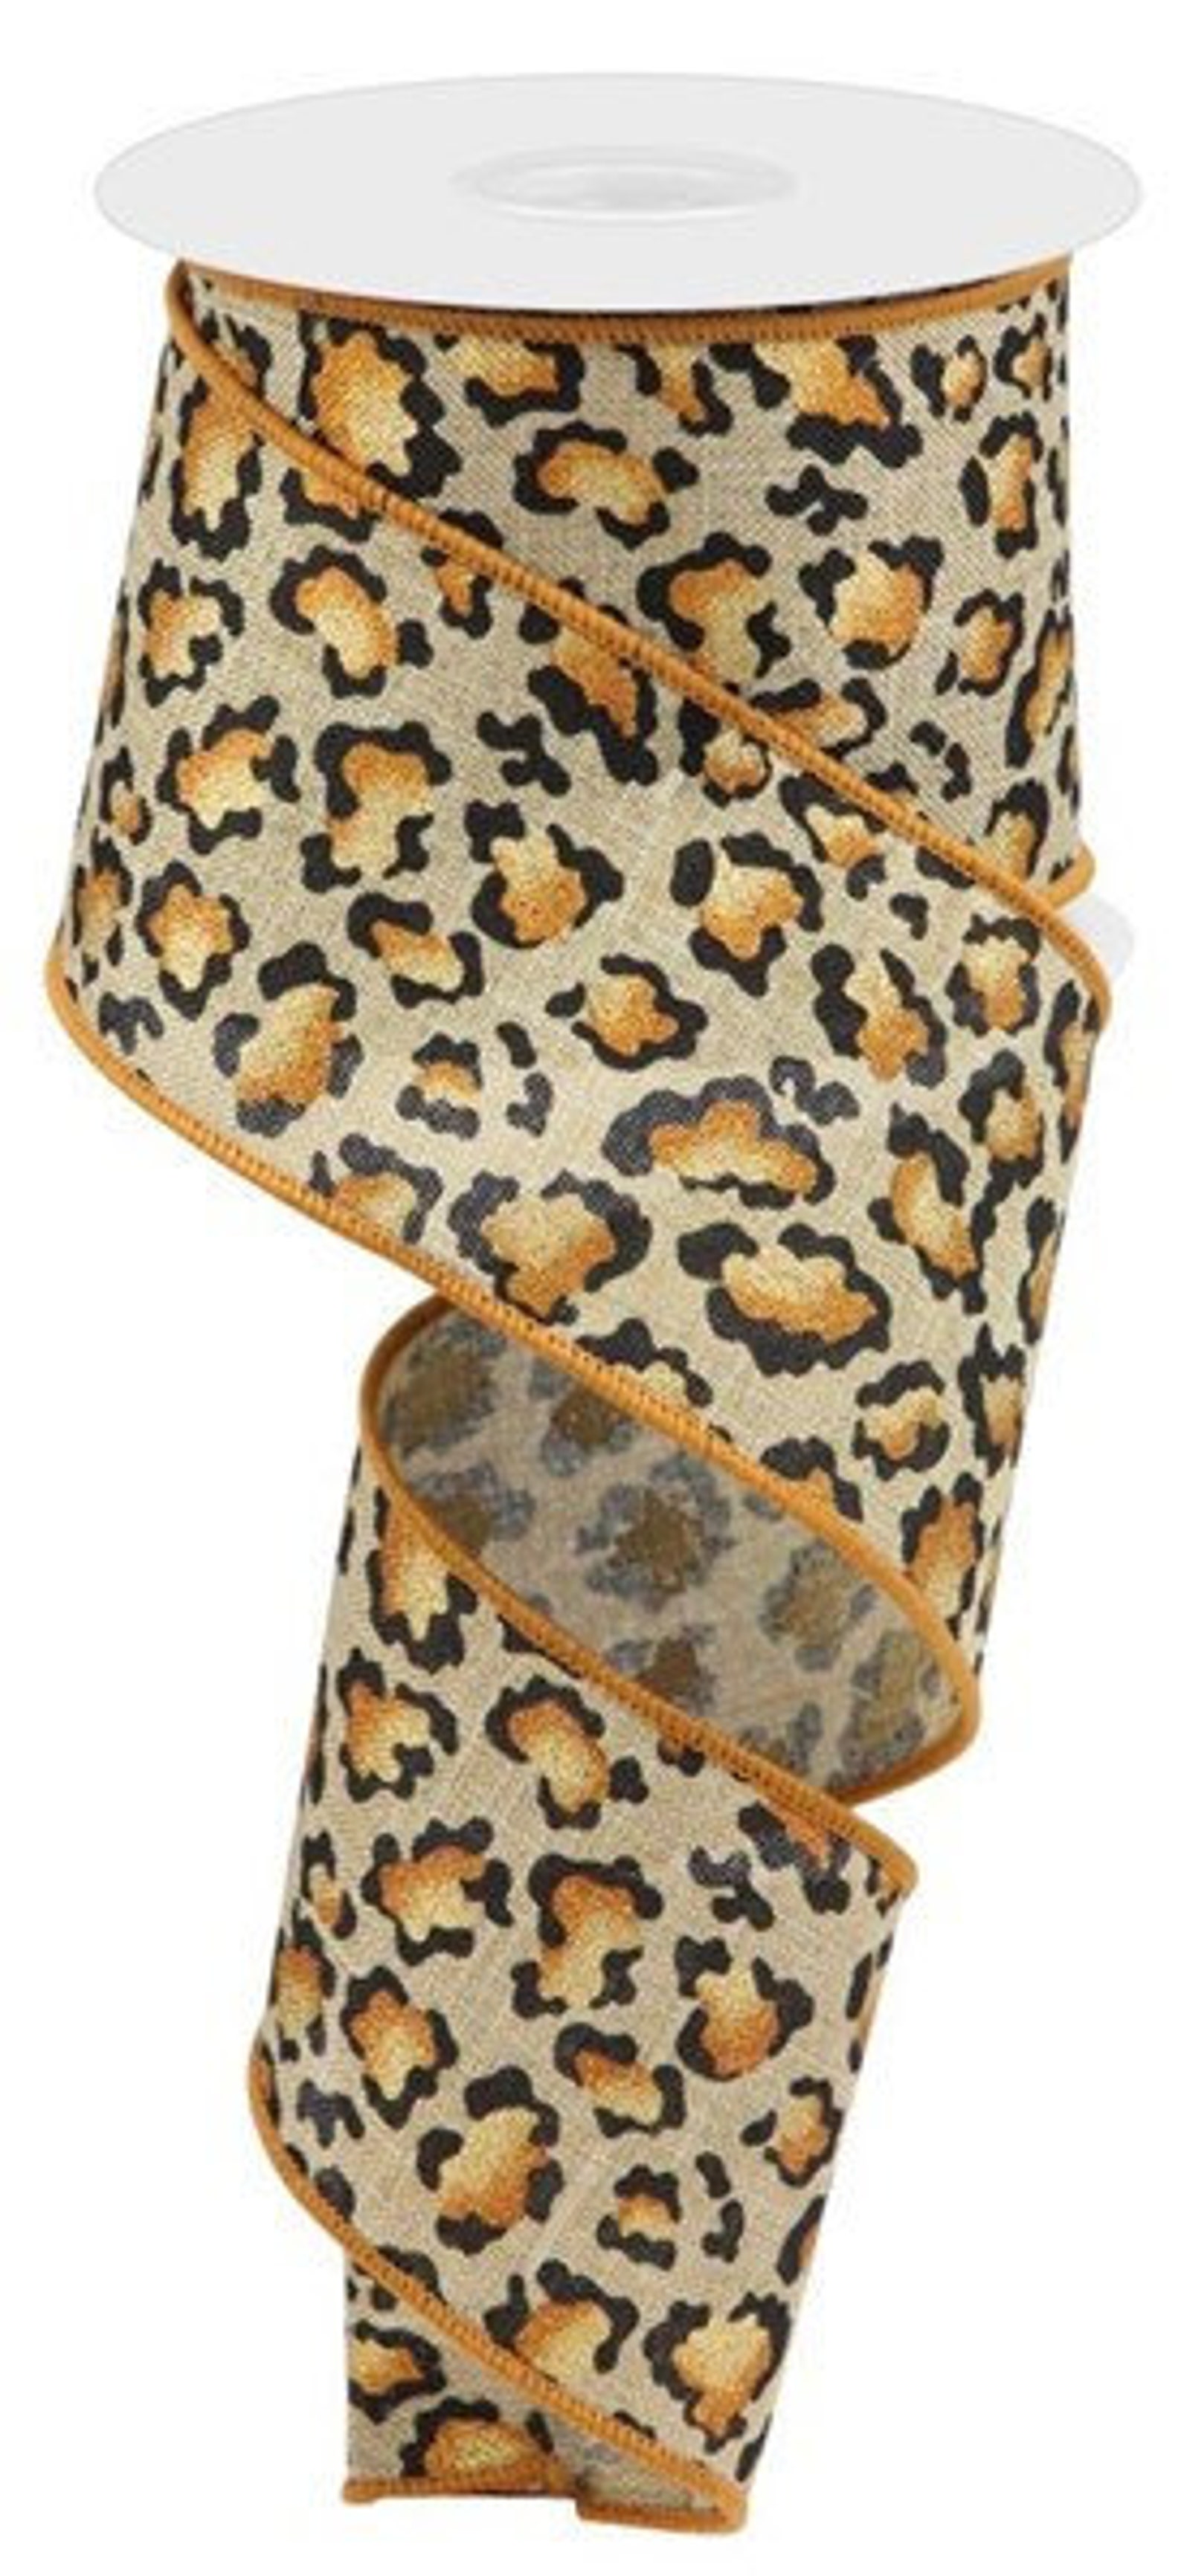 Wired Ribbon by the Roll Light Beige Leopard/cheetah Print on - Etsy